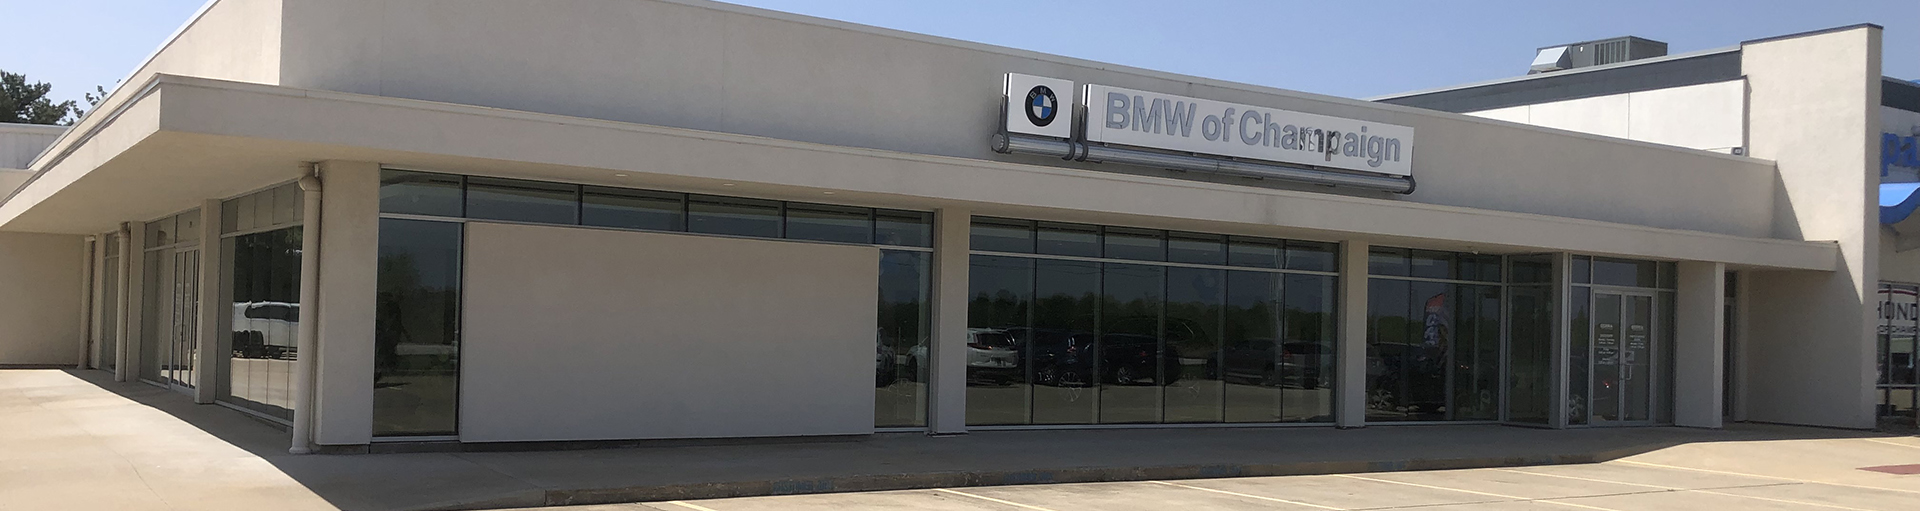 BMW of Champaign Service Department